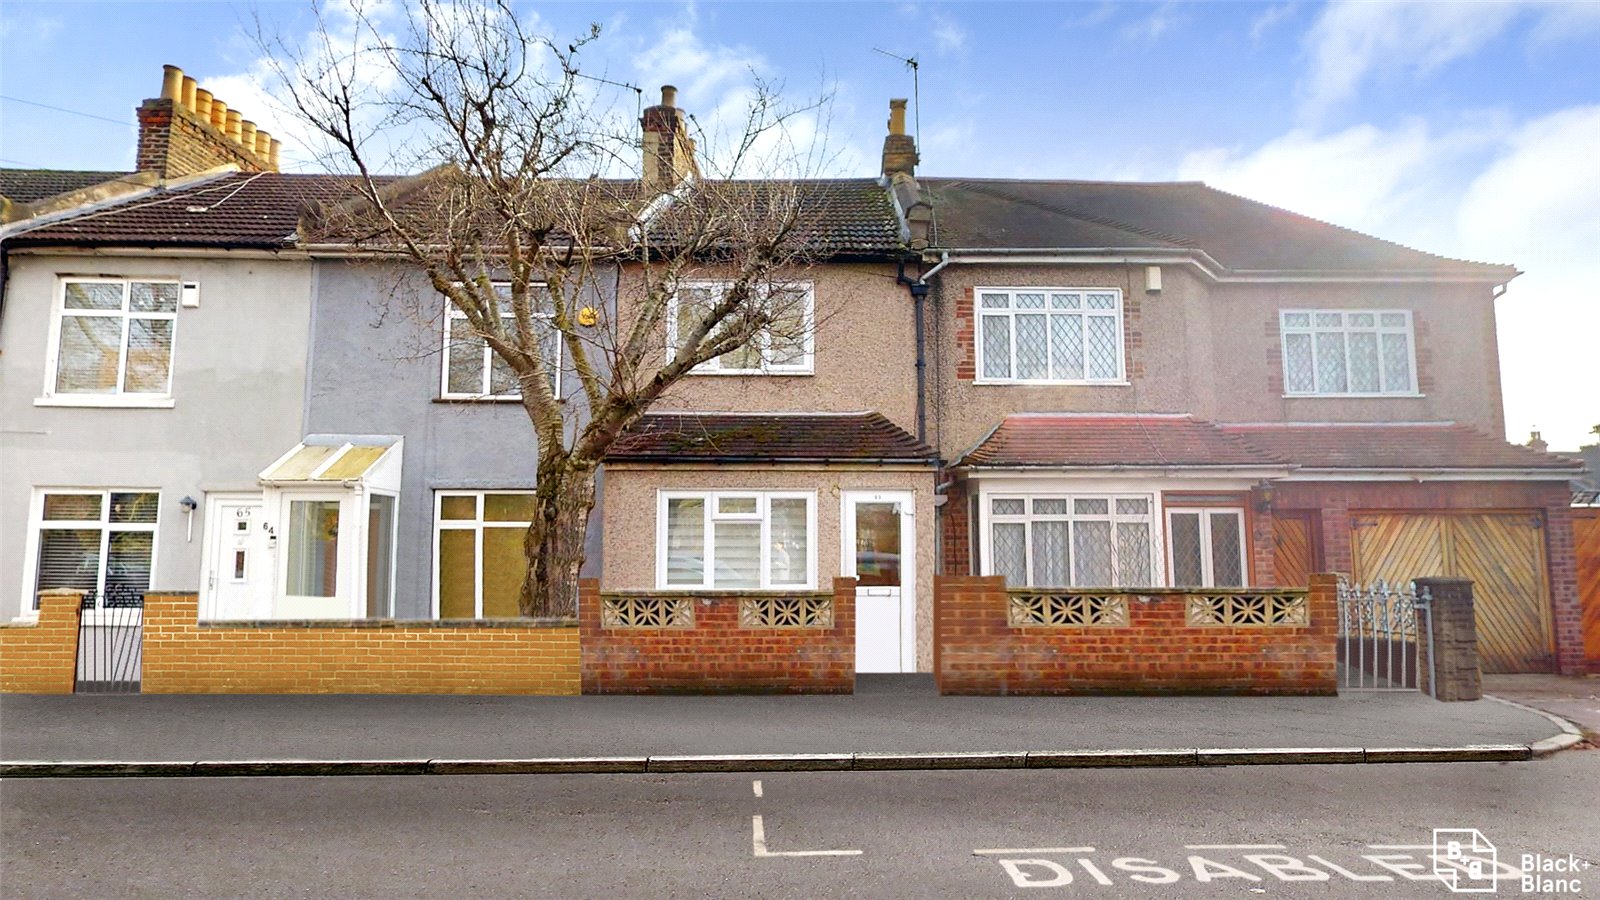 2 bed house for sale in Princess Road - Property Image 1